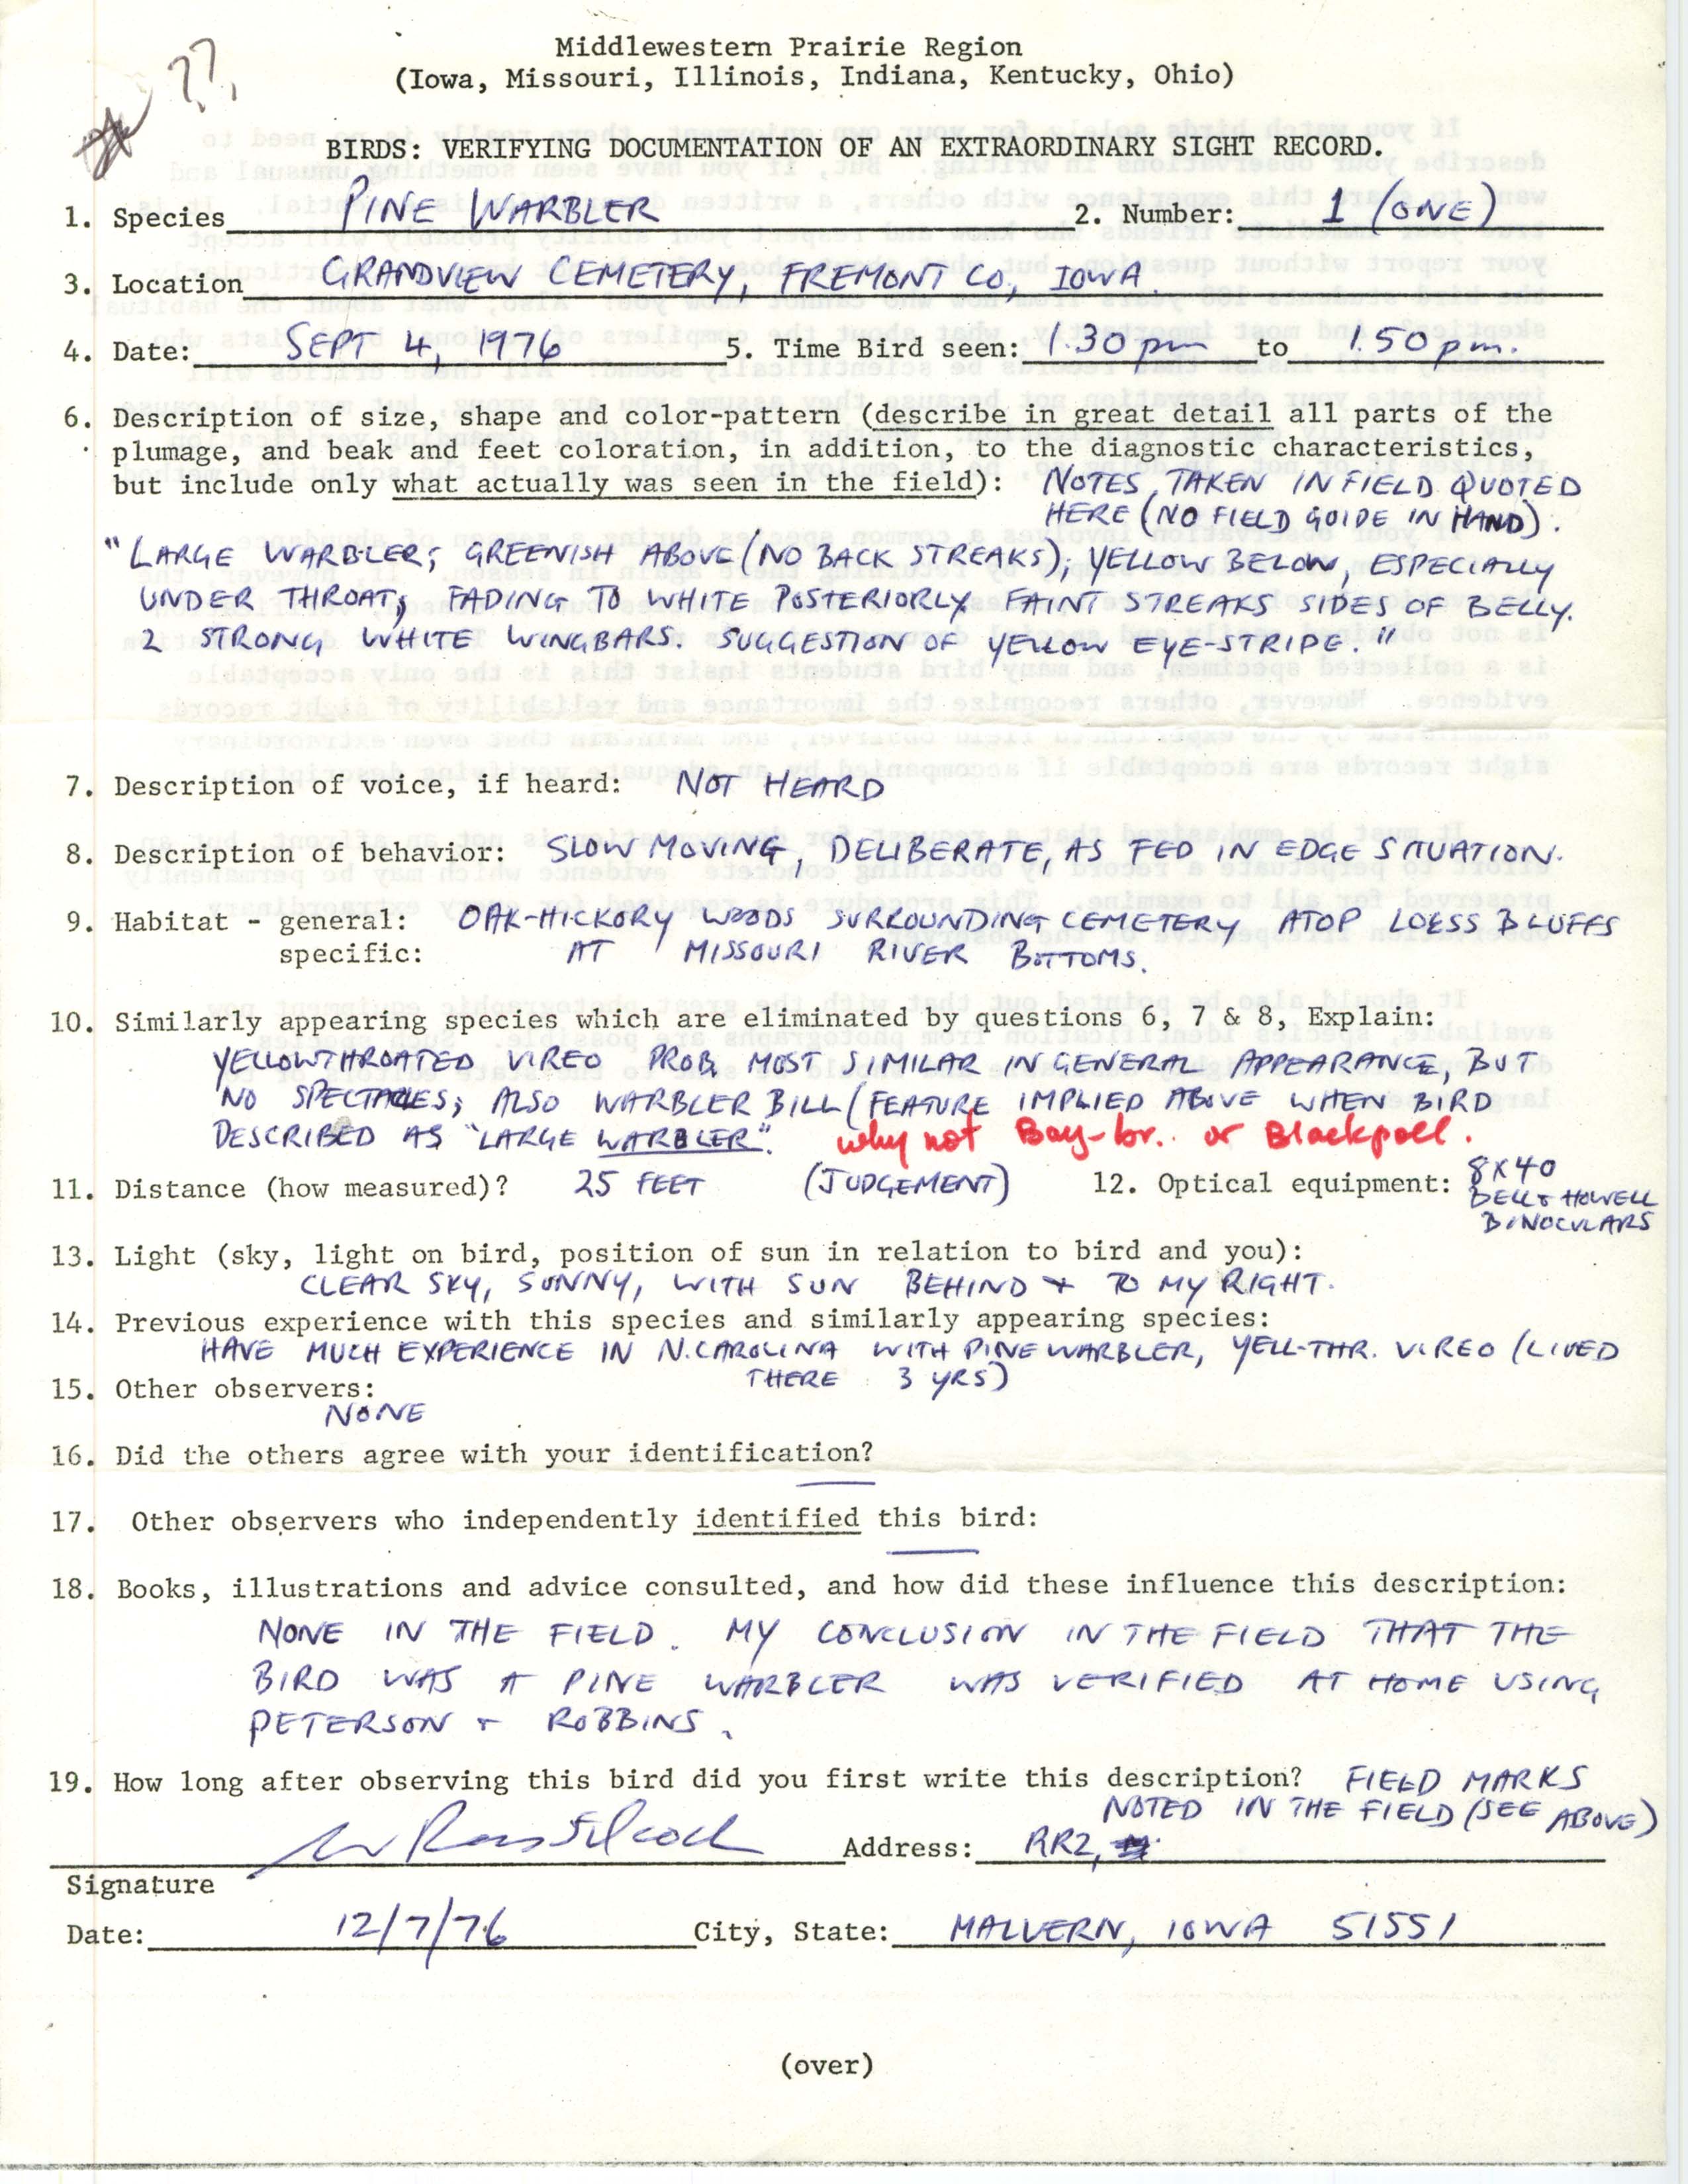 Rare bird documentation form for Pine Warbler at Grandview Cemetery in Fremont County, 1976